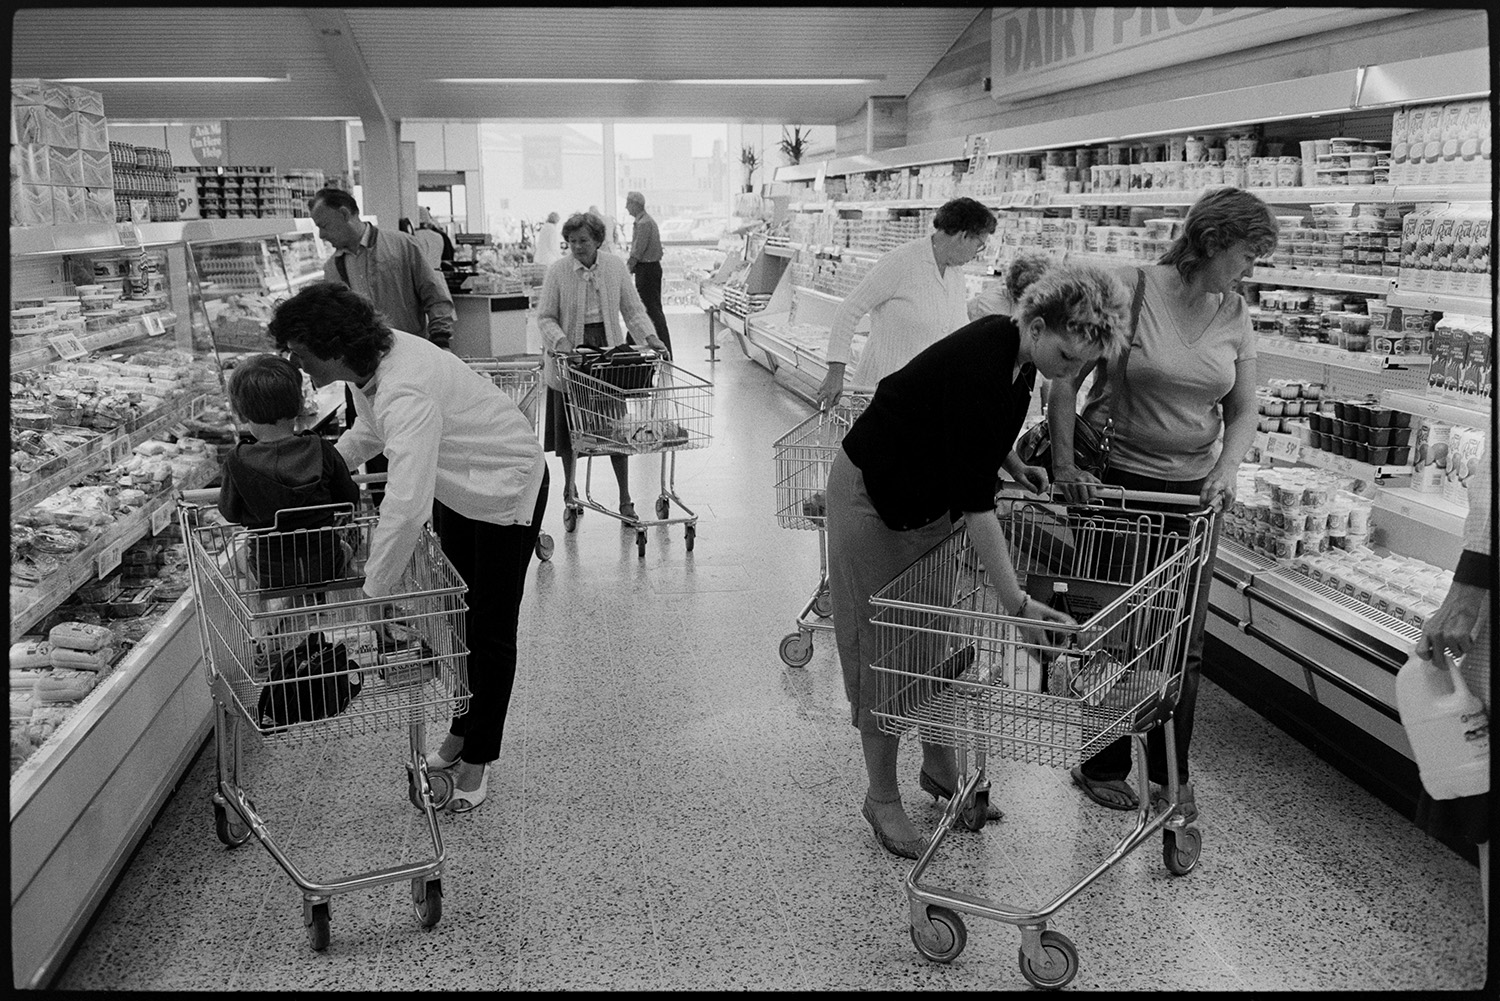 Interior of supermarket, people shopping, car park. Fruit, cash desk, check out.
[Women, men and children shopping in Presto Food Market in Bideford. They are placing items in trolleys in an aisle with chiller cabinets and shelves.]